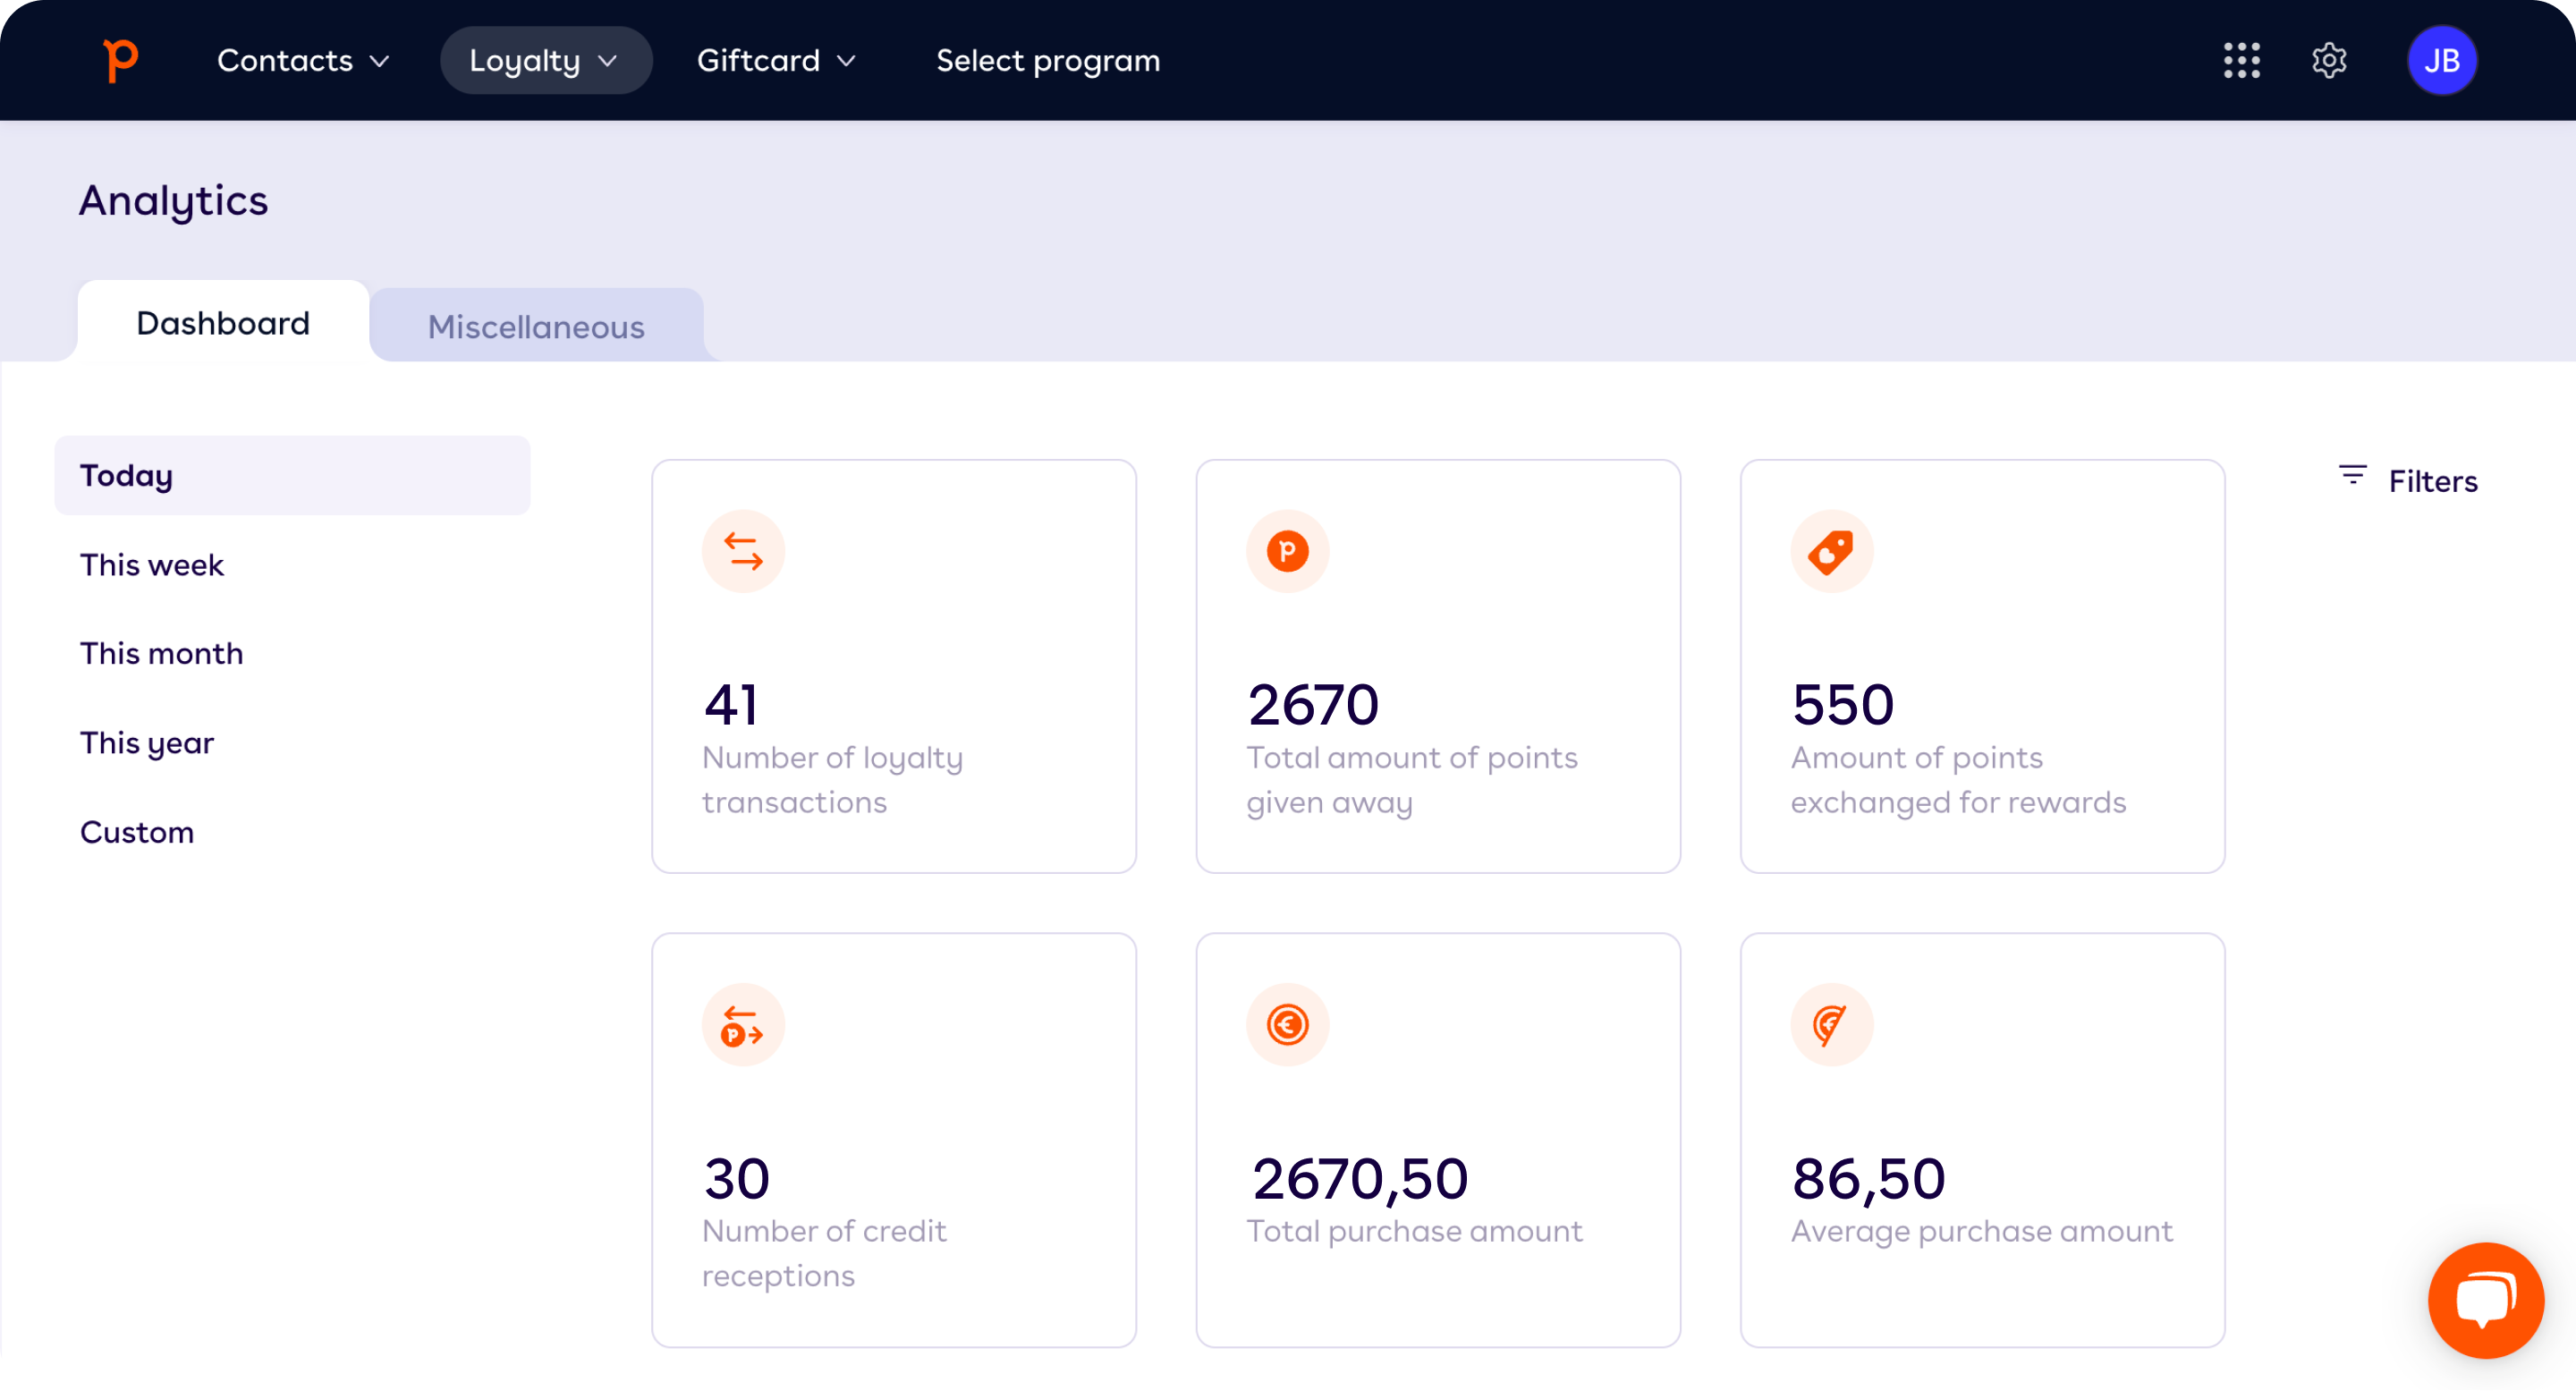 Easily check the progress of your rewards program in the analytics dashboard.